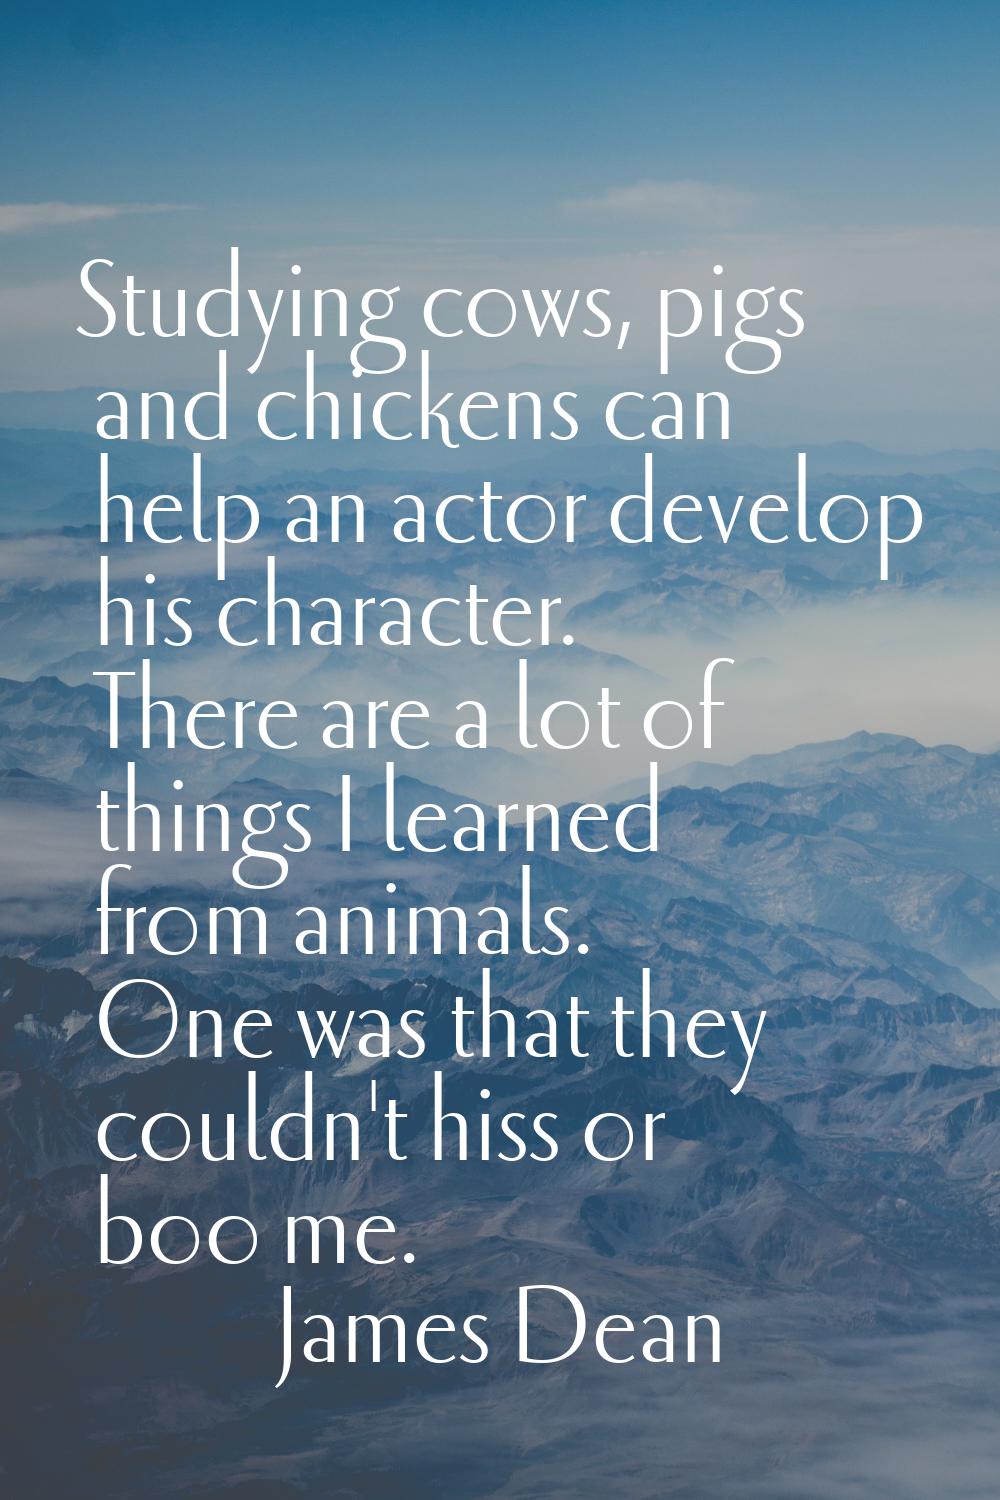 Studying cows, pigs and chickens can help an actor develop his character. There are a lot of things